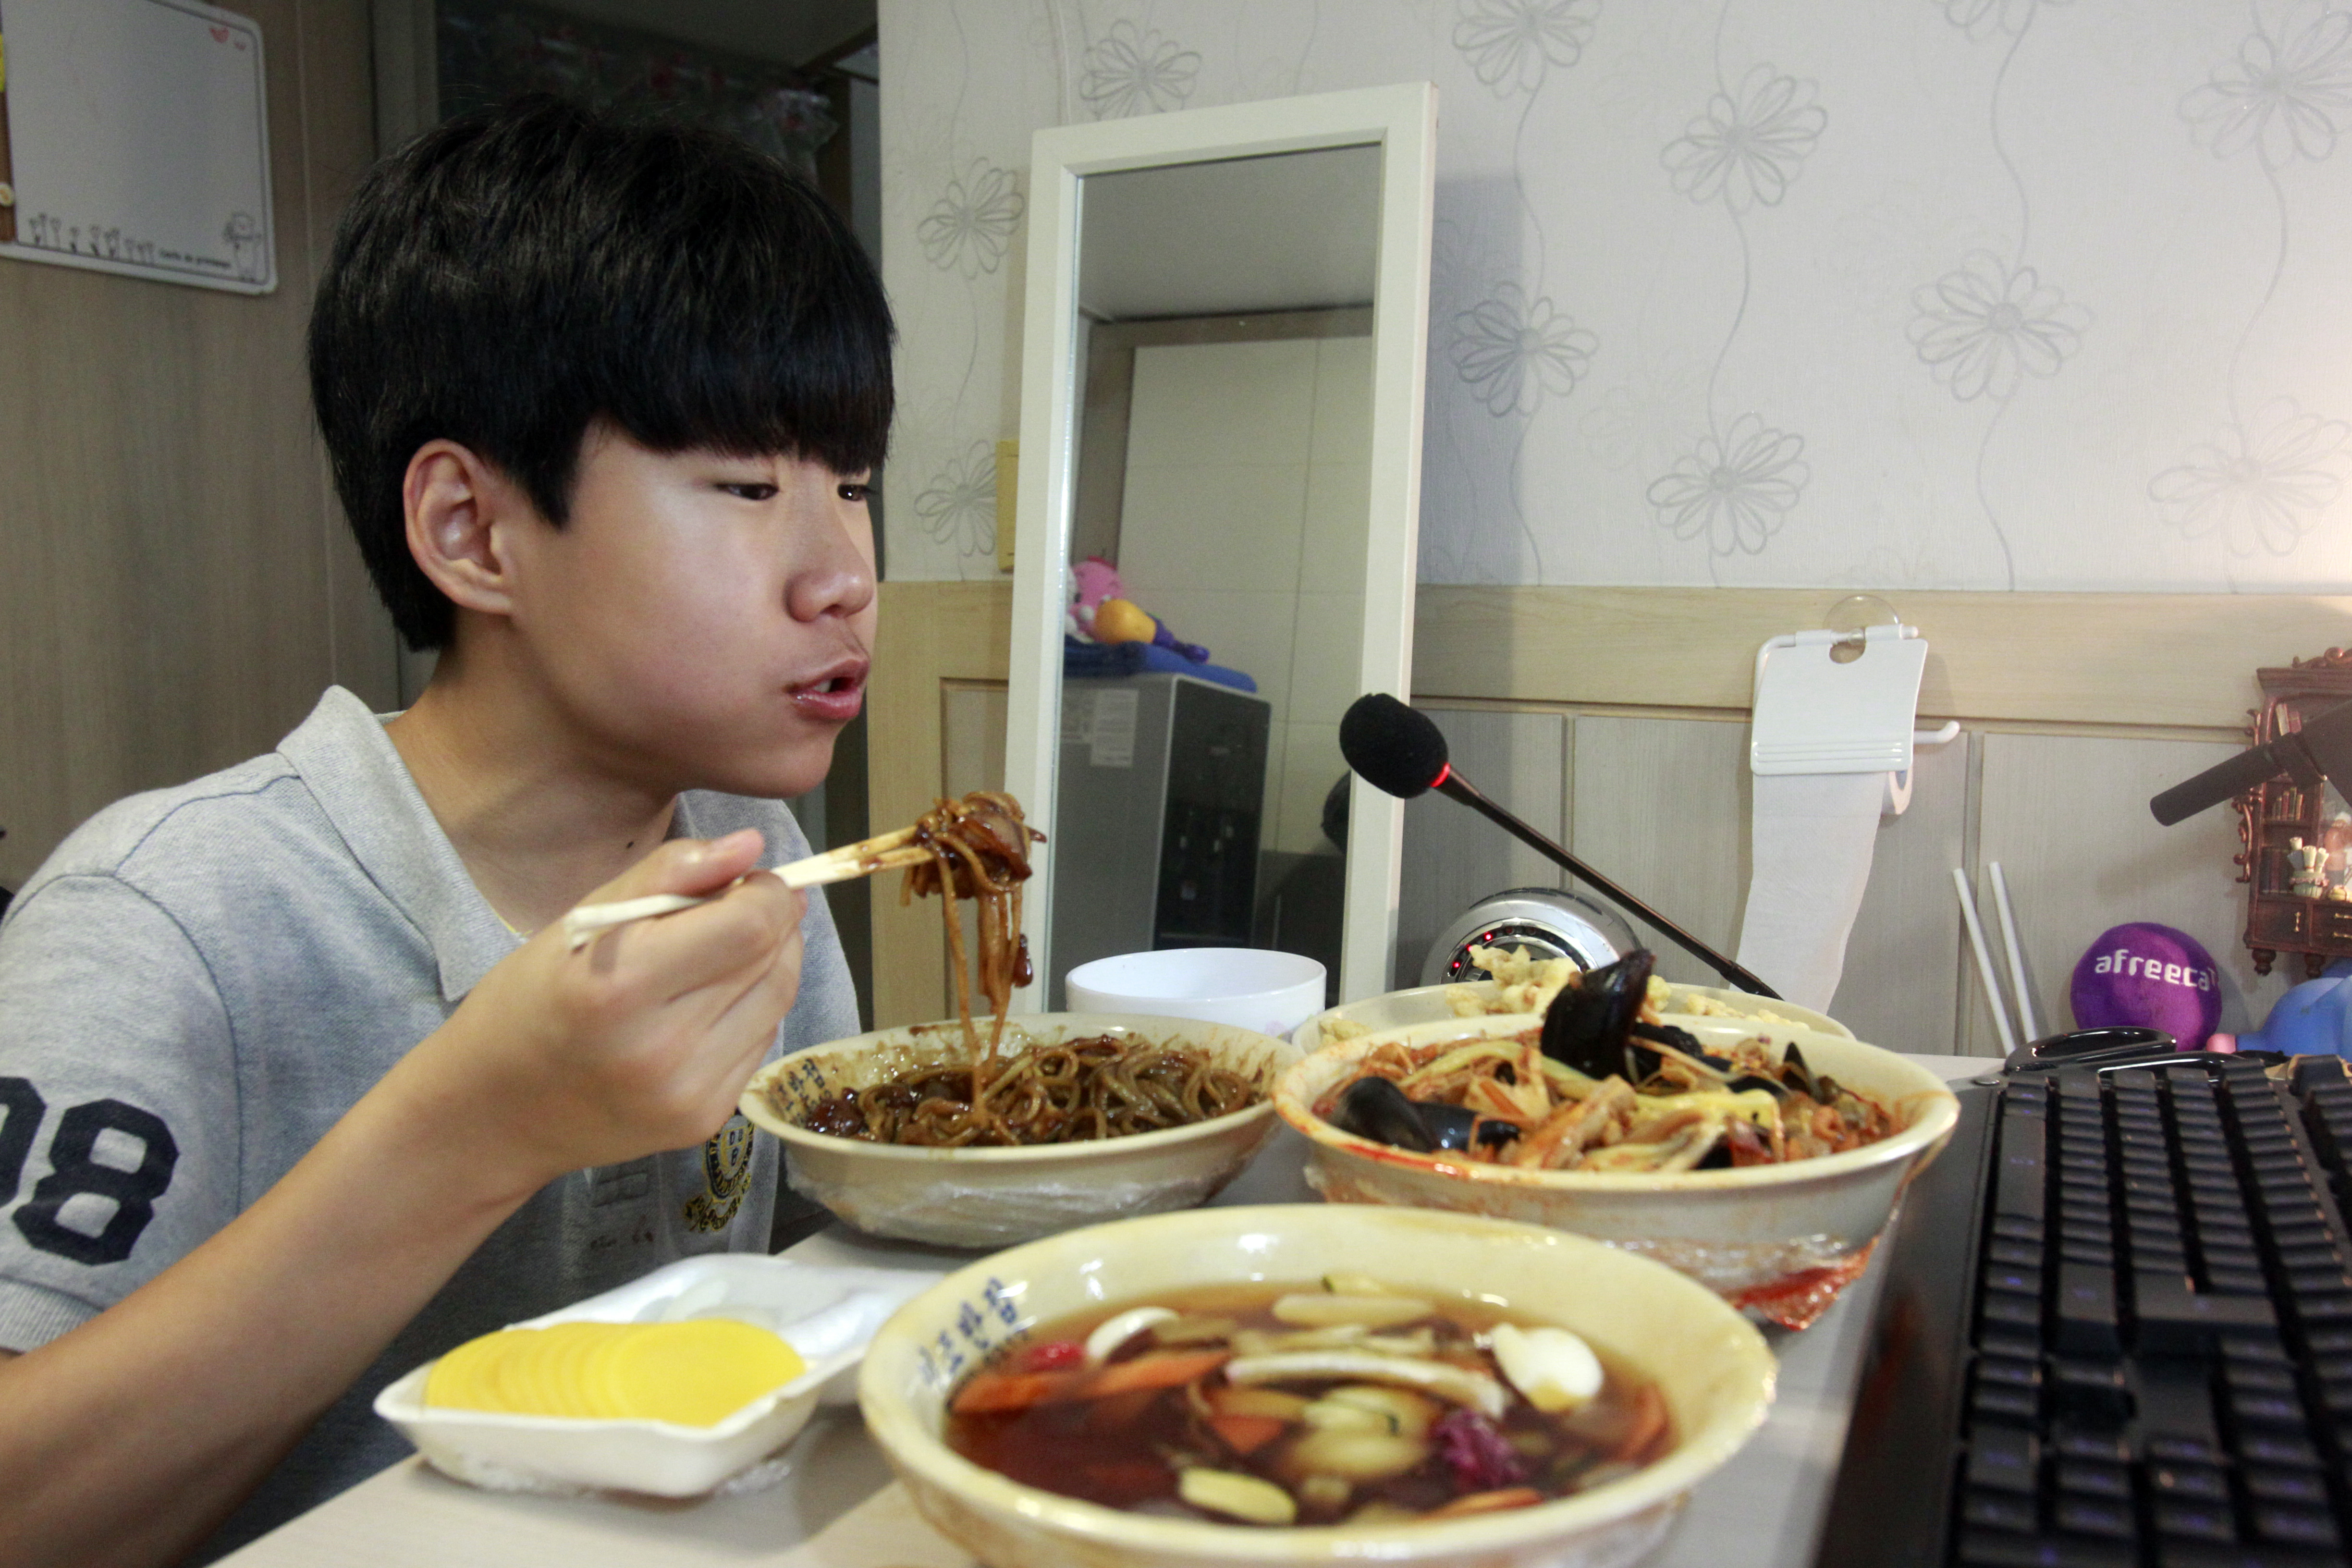 In this Monday, Aug 17, 2015 photo, Kim Sung-jin, 14, broadcasts himself eating delivery Chinese food in his room at home in Bucheon, south of Seoul, South Korea. Every evening, he gorges on food as he chats before a live camera with hundreds, sometimes thousands, of teenagers watching. Thatu0092s the show, and it makes Kim money: 2 million won ($1,700) in his most successful episode. Better known to his viewers by the nickname Patoo, he is one of the youngest broadcasters on Afreeca TV, an app for live-broadcasting video online launched in 2006. Photo: AP